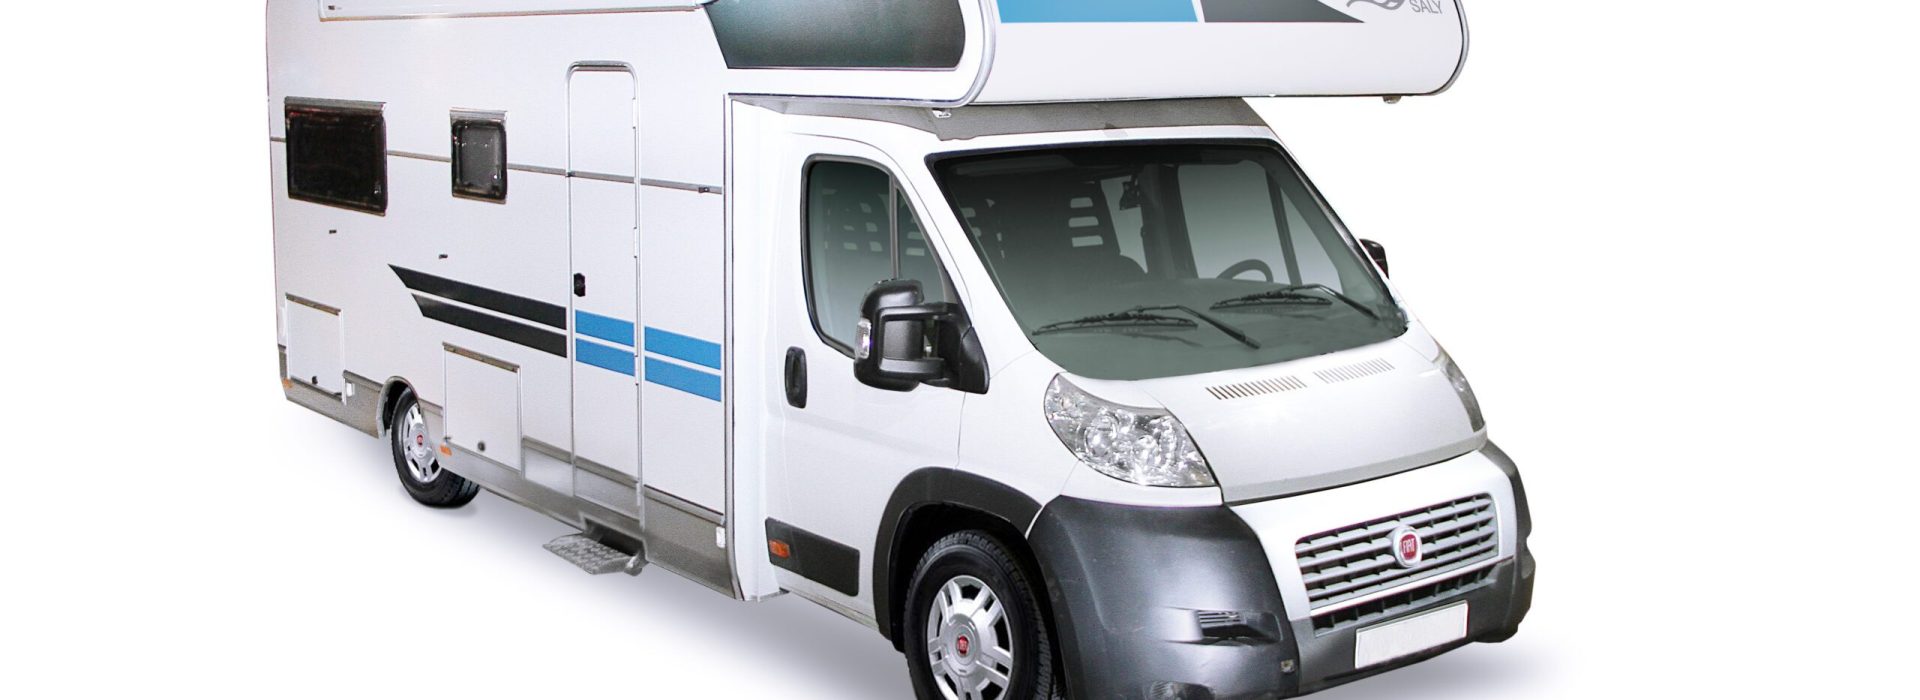 SALY Active Motorhome 6